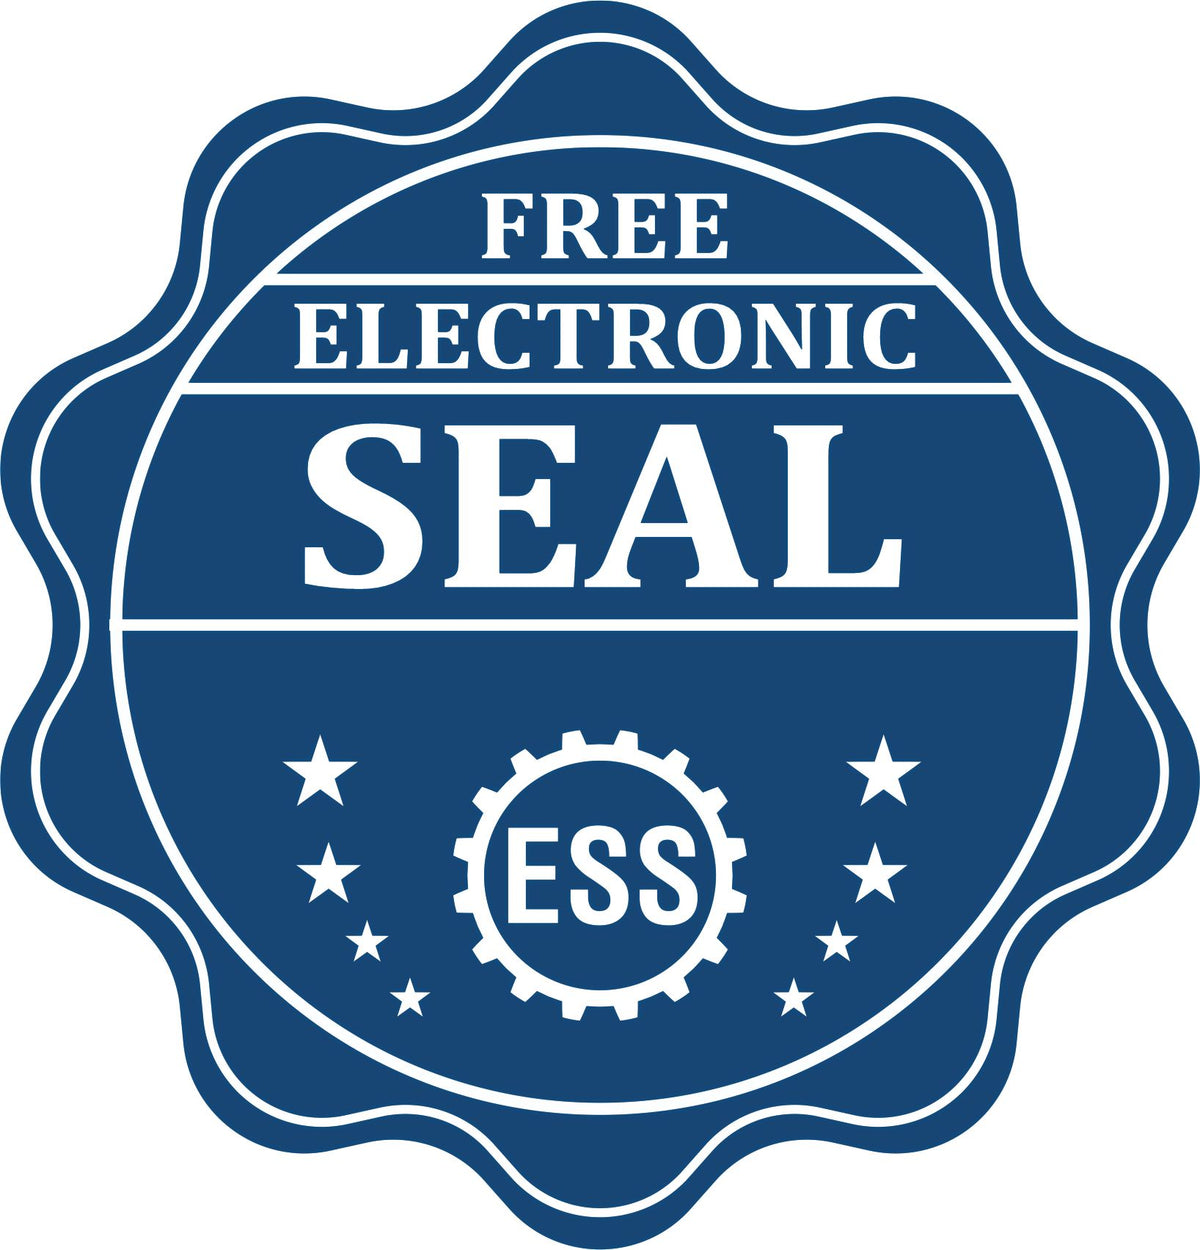 A badge showing a free electronic seal for the State of Georgia Long Reach Architectural Embossing Seal with stars and the ESS gear on the emblem.